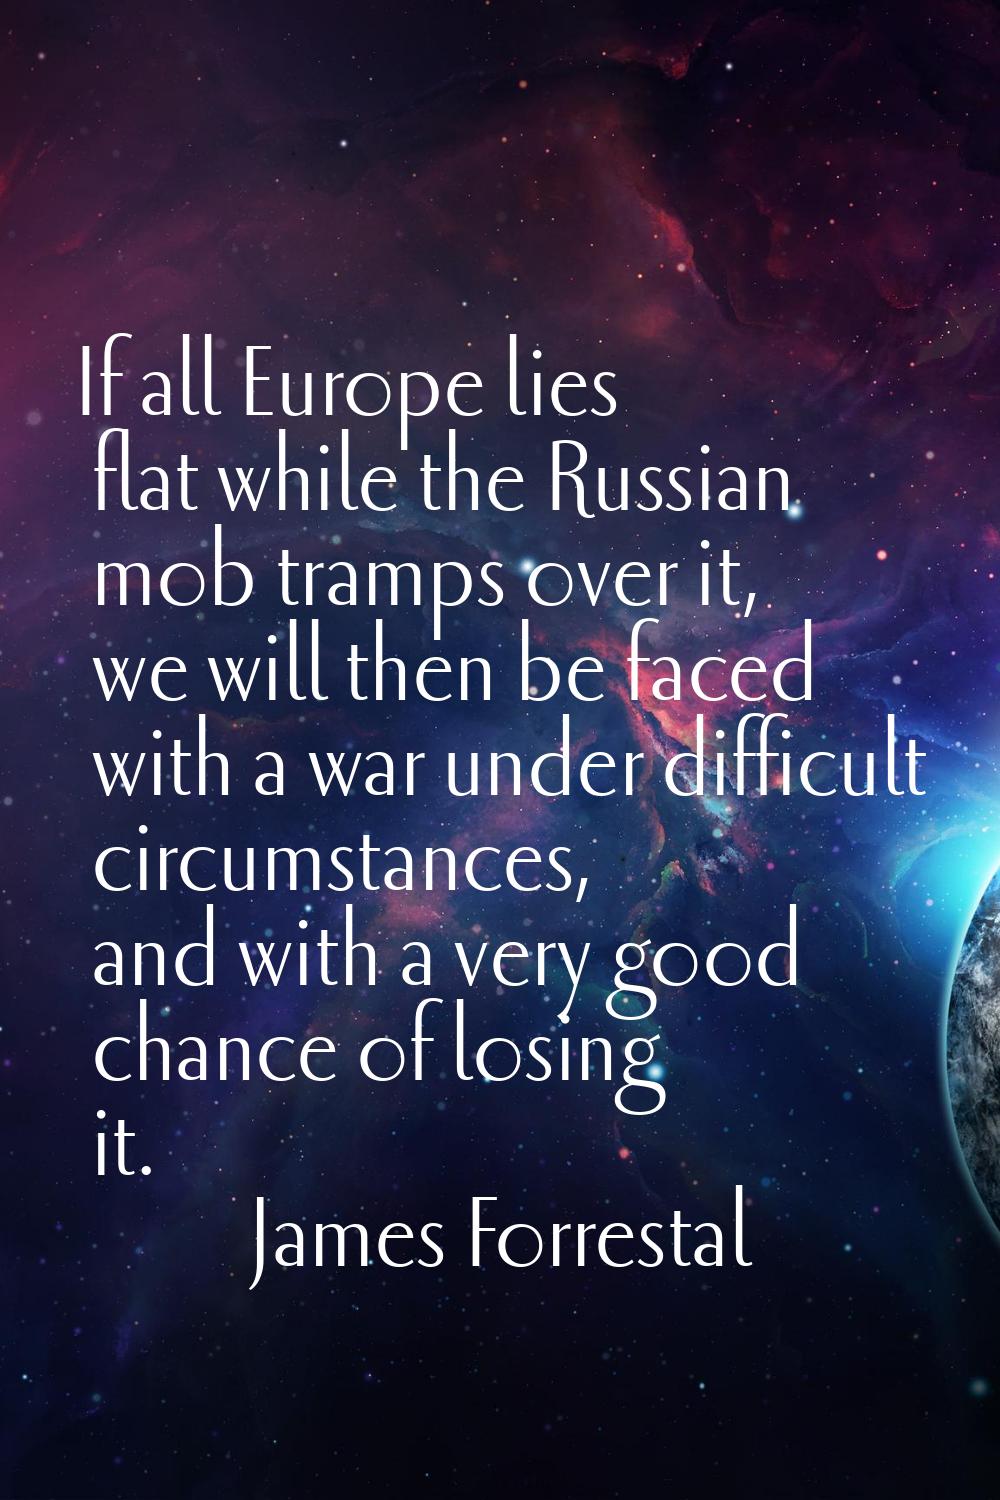 If all Europe lies flat while the Russian mob tramps over it, we will then be faced with a war unde